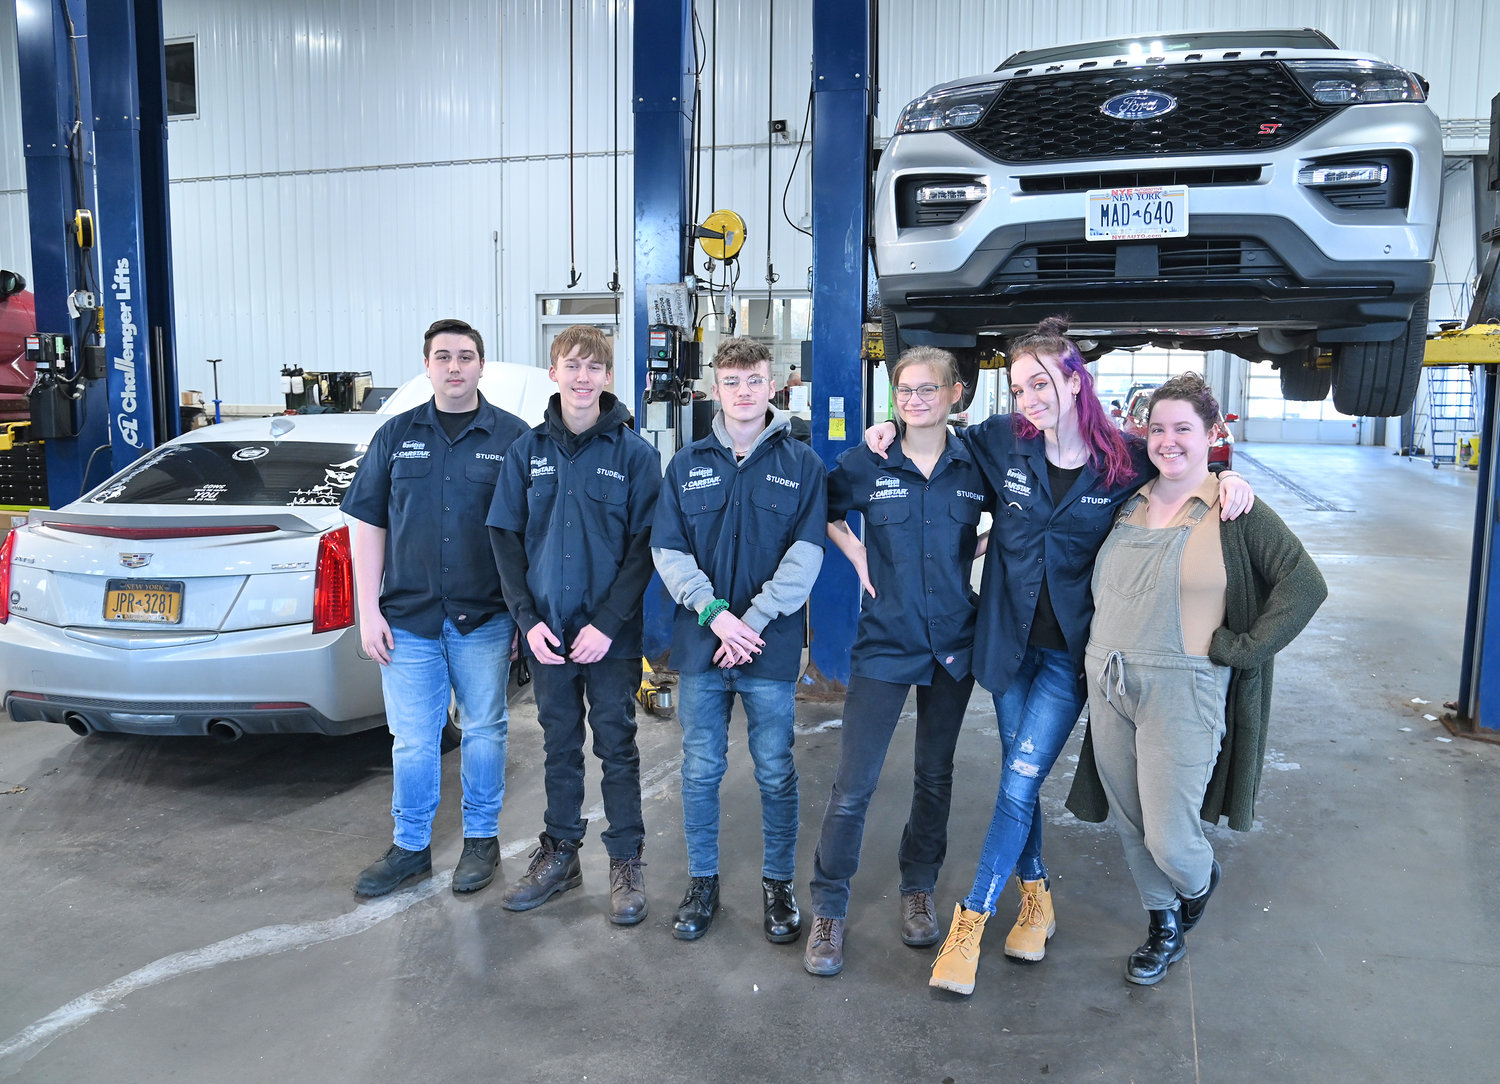 Madison-Oneida BOCES students, from left, Kristian Streiff and Joe Corigliano from Rome Free Academy, Dillon Walters from Oneida, Faith Bunal and Tailor Pope from RFA and Teacher Assistant Ashley Esengard pose Friday, Oct. 21, at the CARSTAR Davidson Collision facility in Rome.